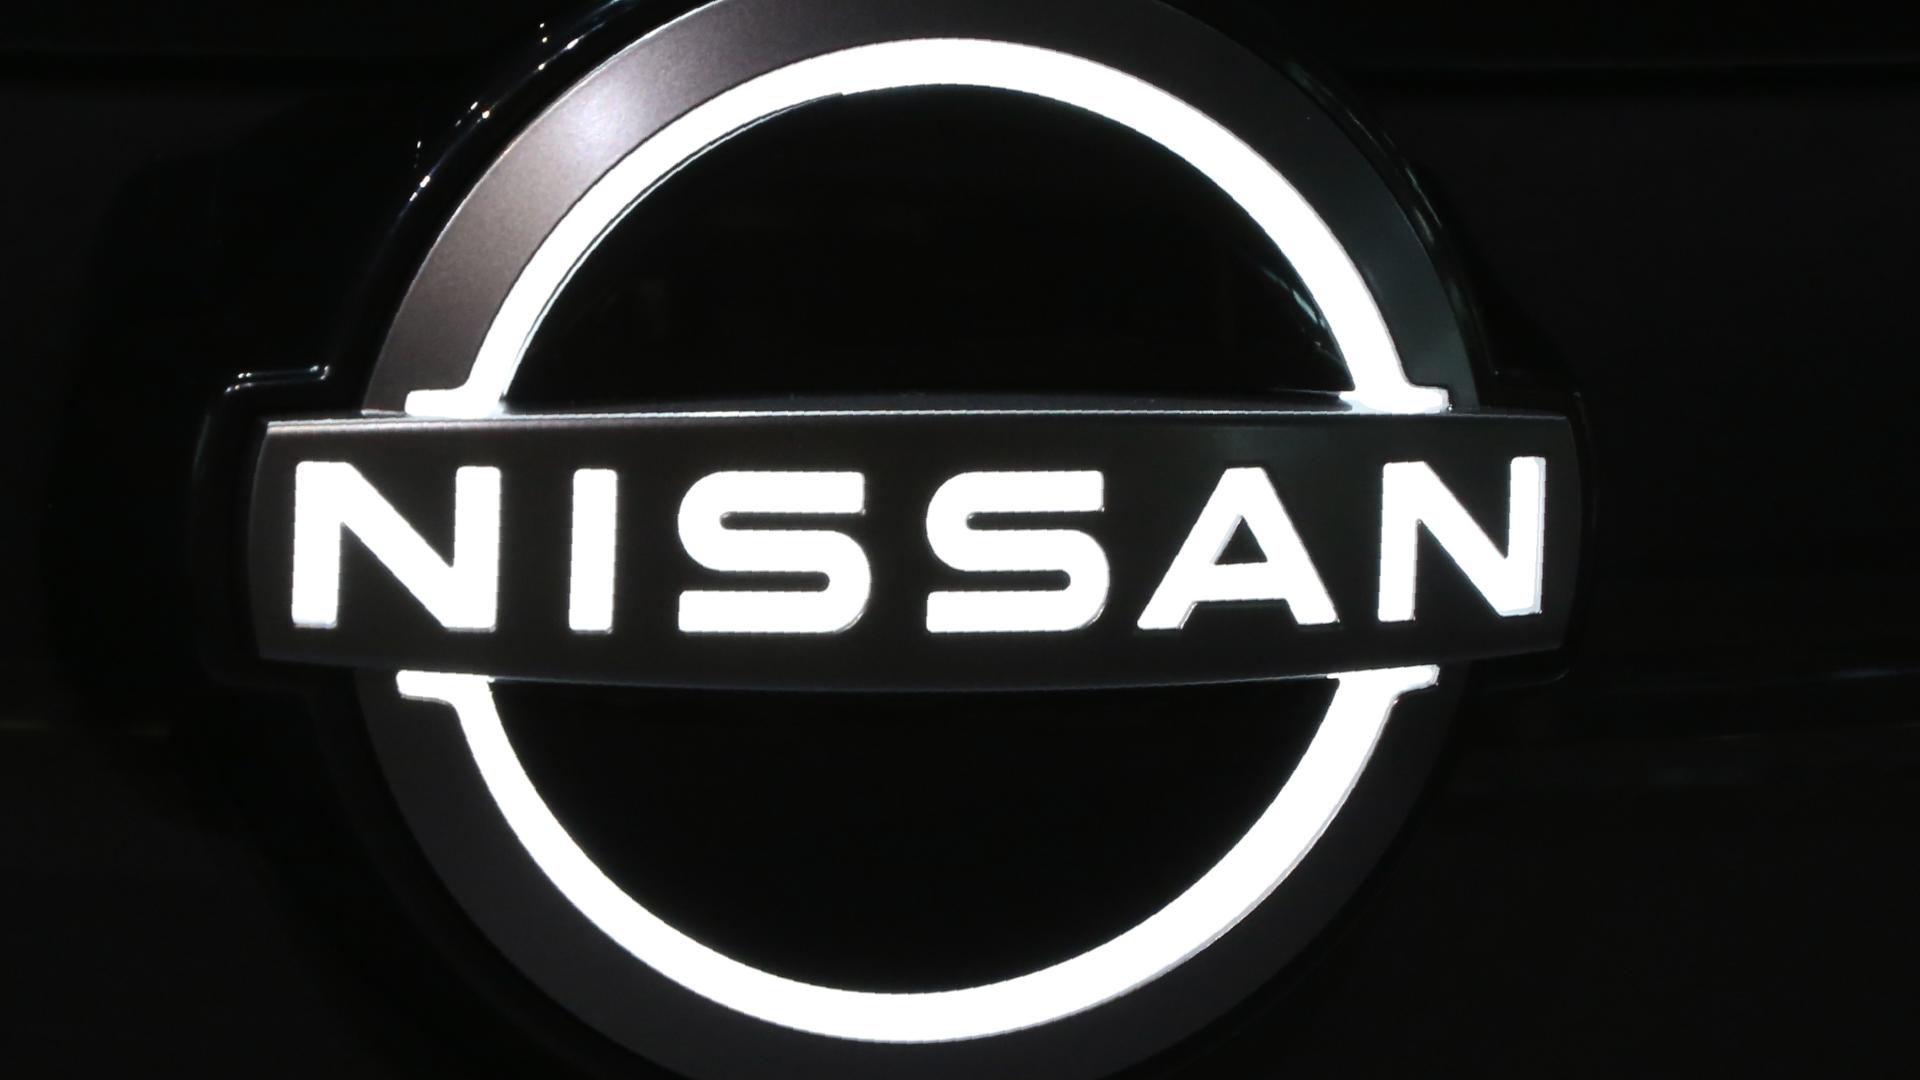 Nissan is telling people not to drive older models because the airbag inflators could explode.